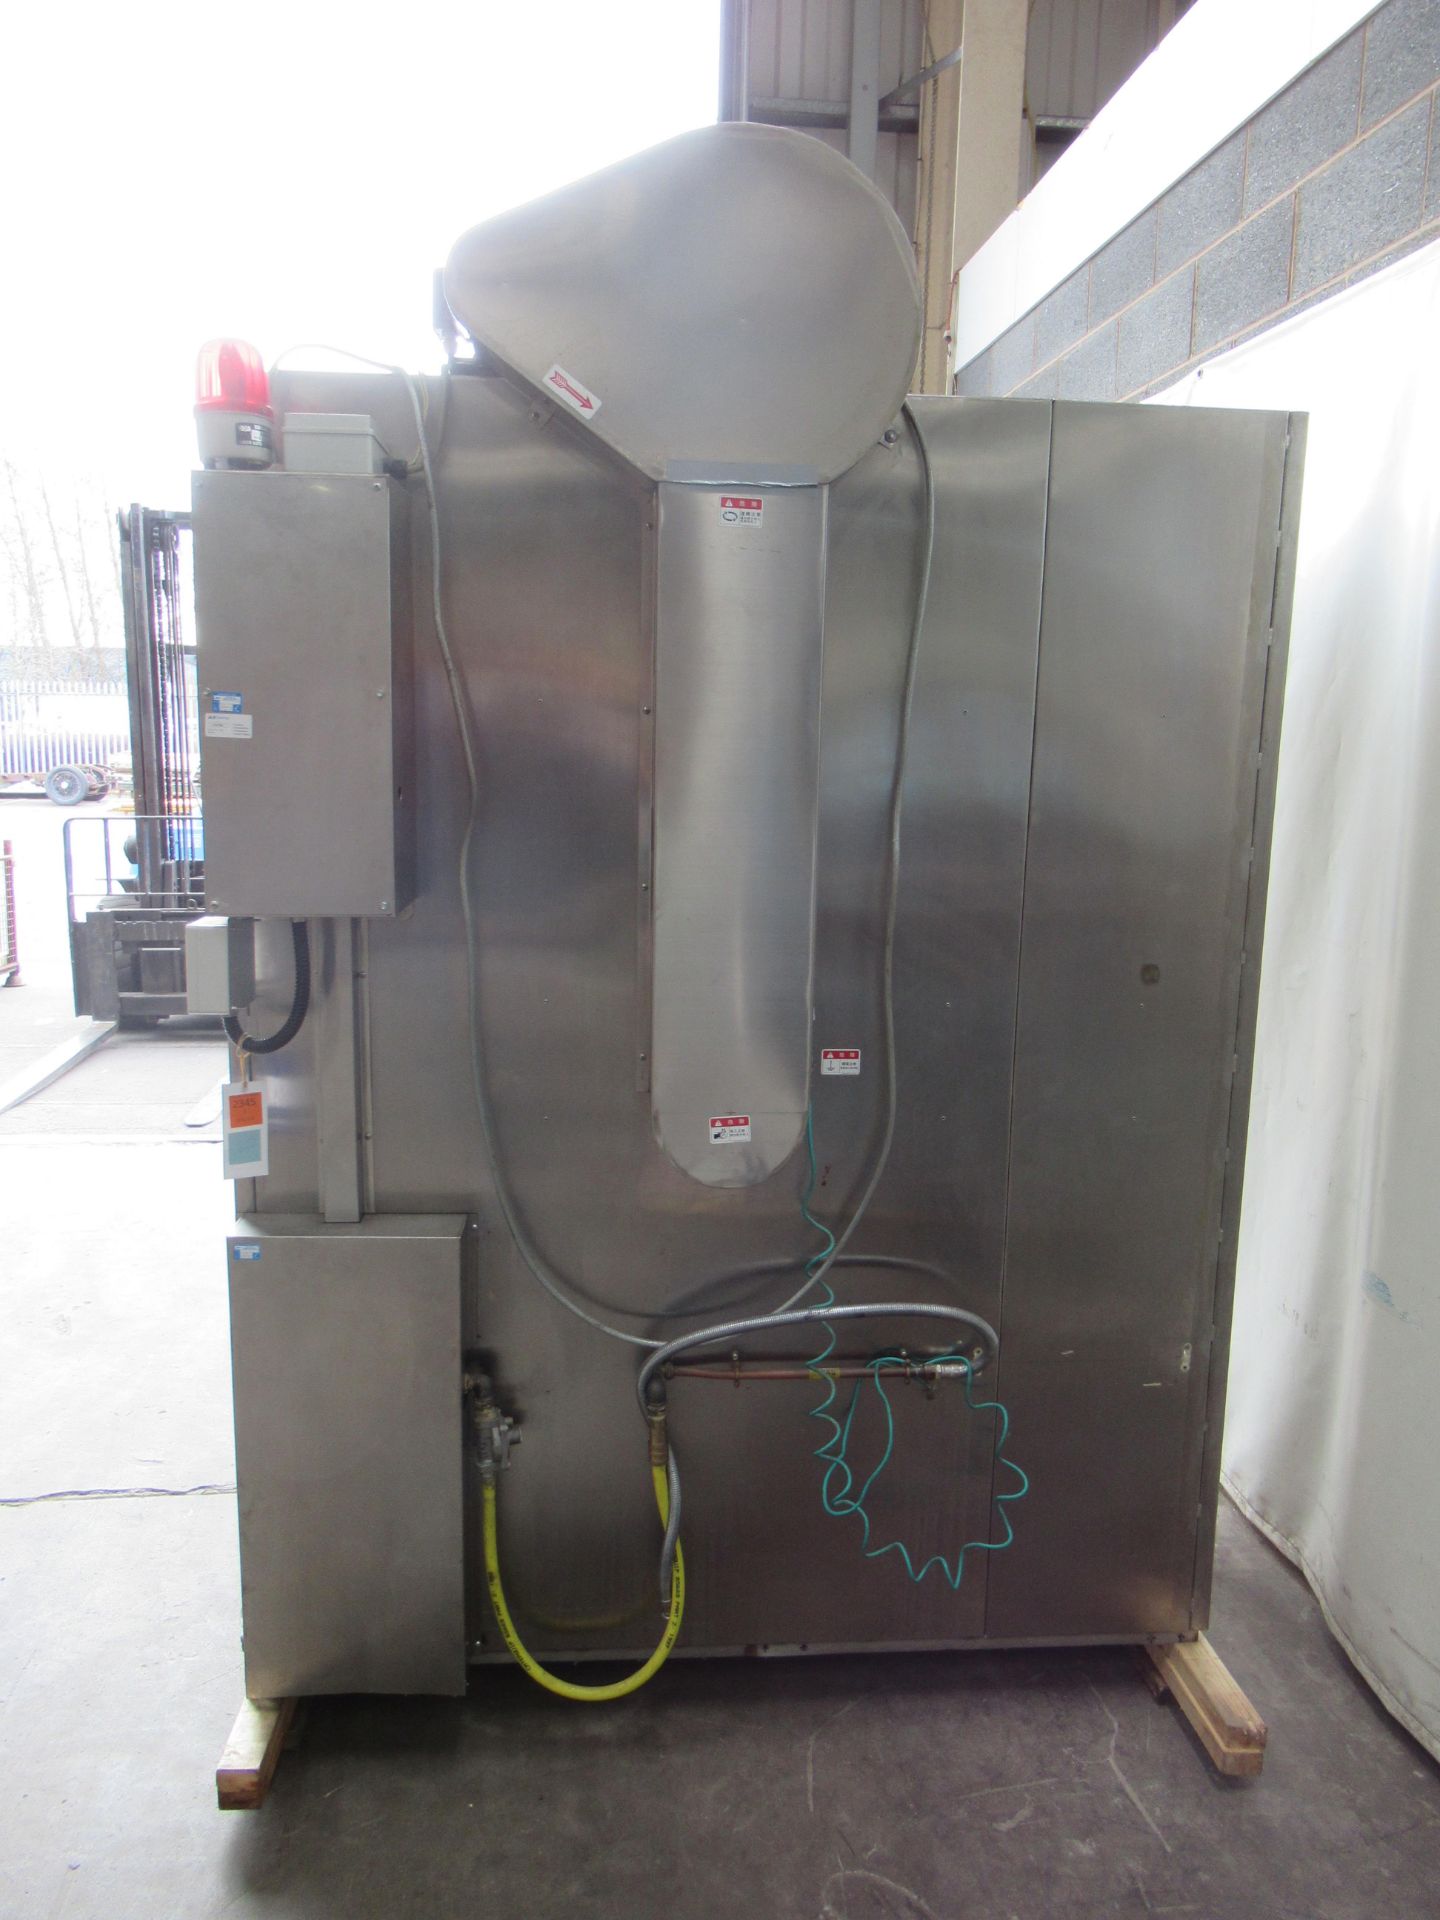 Tsung Hsing 'box type dryer' commercial oven/dryer with two trollies, 415V, 50Hz - Image 6 of 7